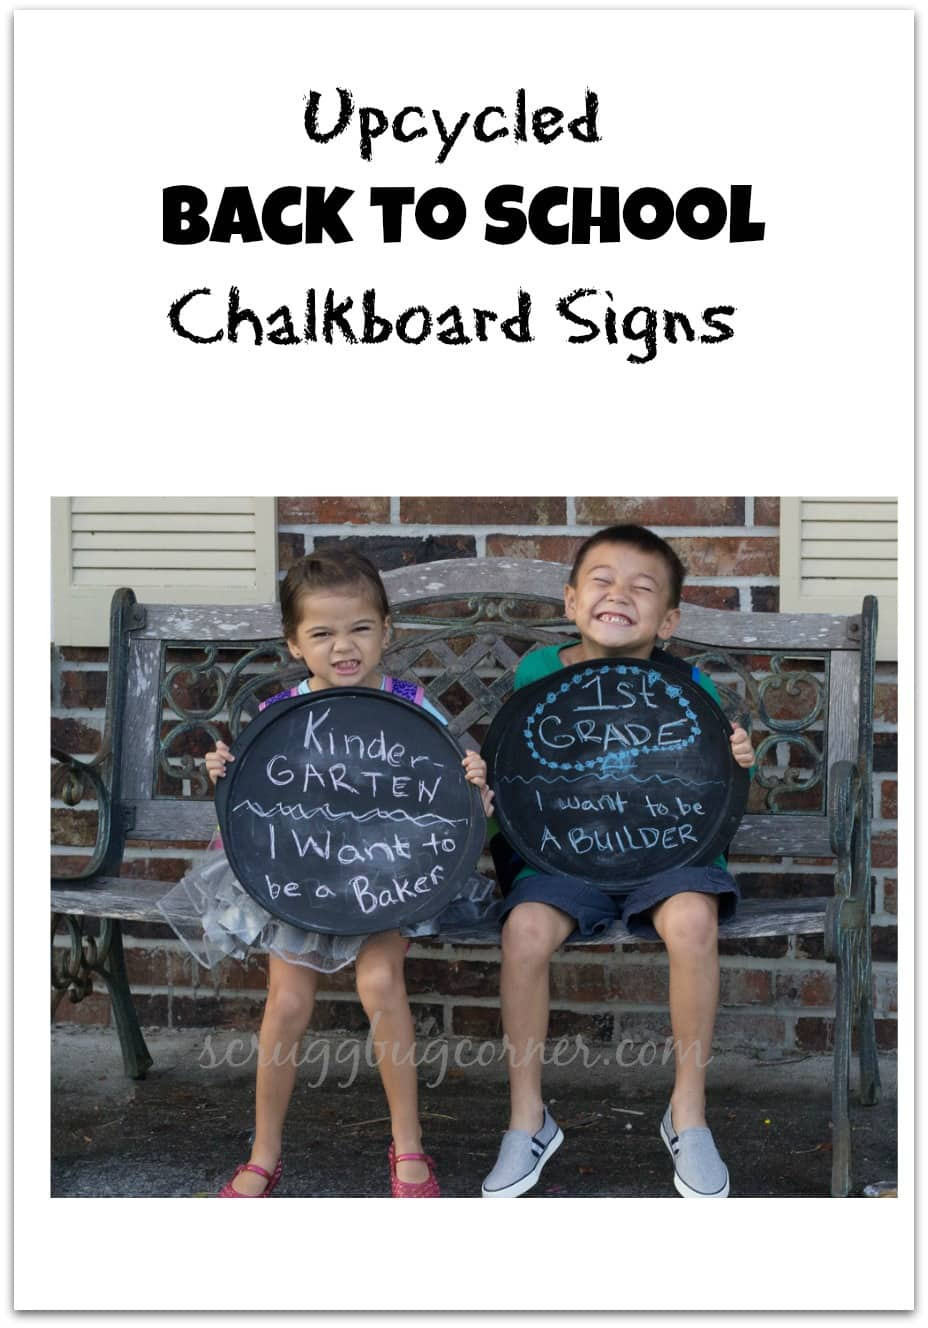 Back To School Chalkboard
 Upcycled Back to School Chalkboard Signs Gym Craft Laundry